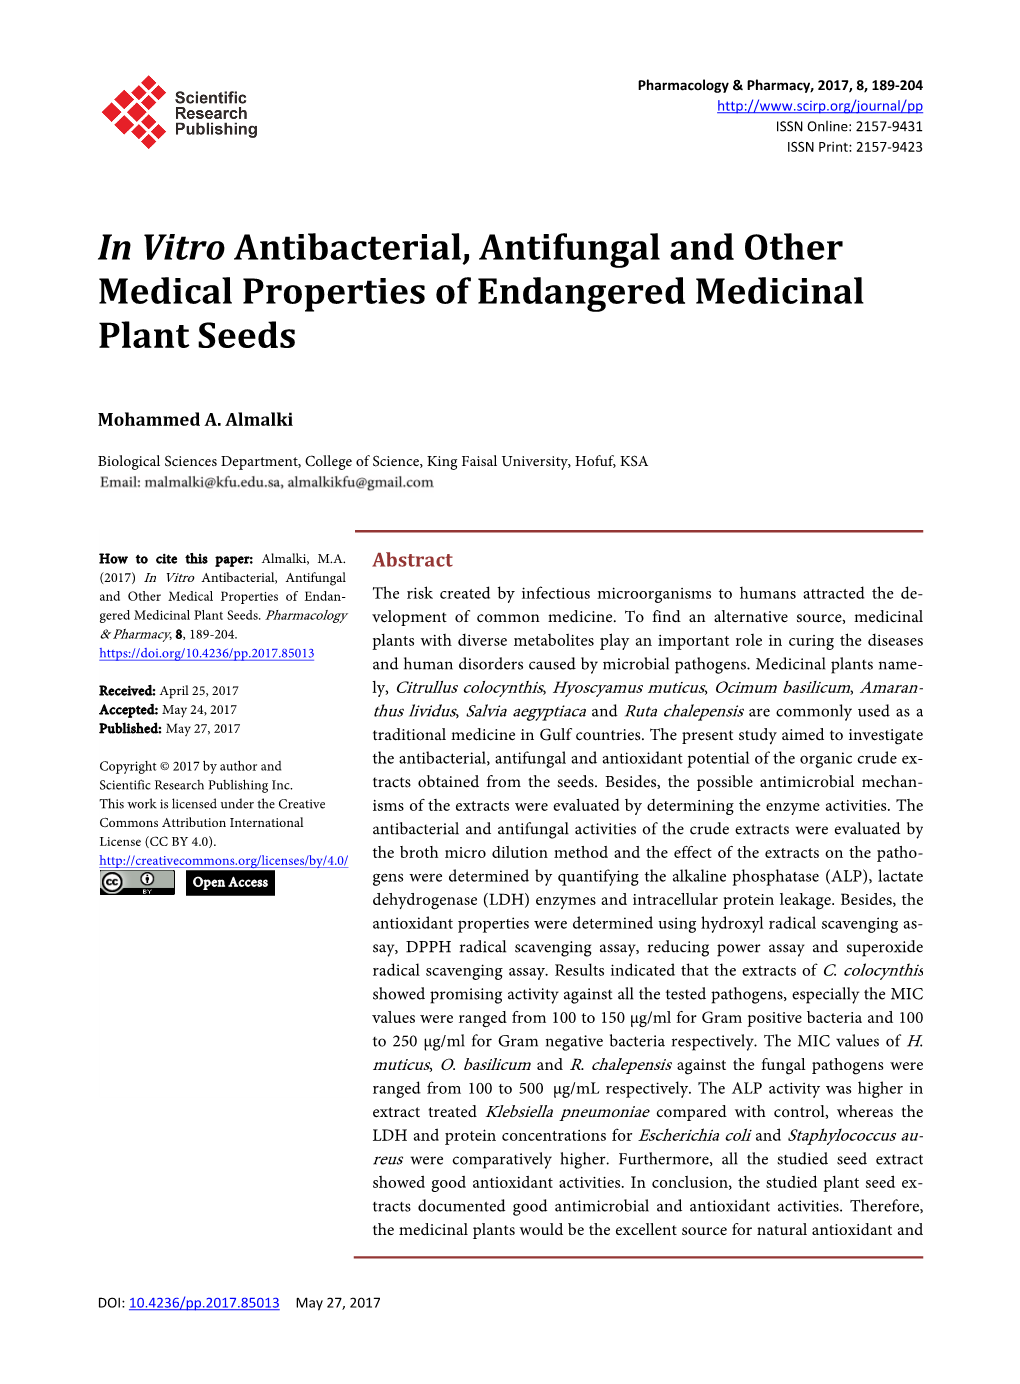 In Vitro Antibacterial, Antifungal and Other Medical Properties of Endangered Medicinal Plant Seeds